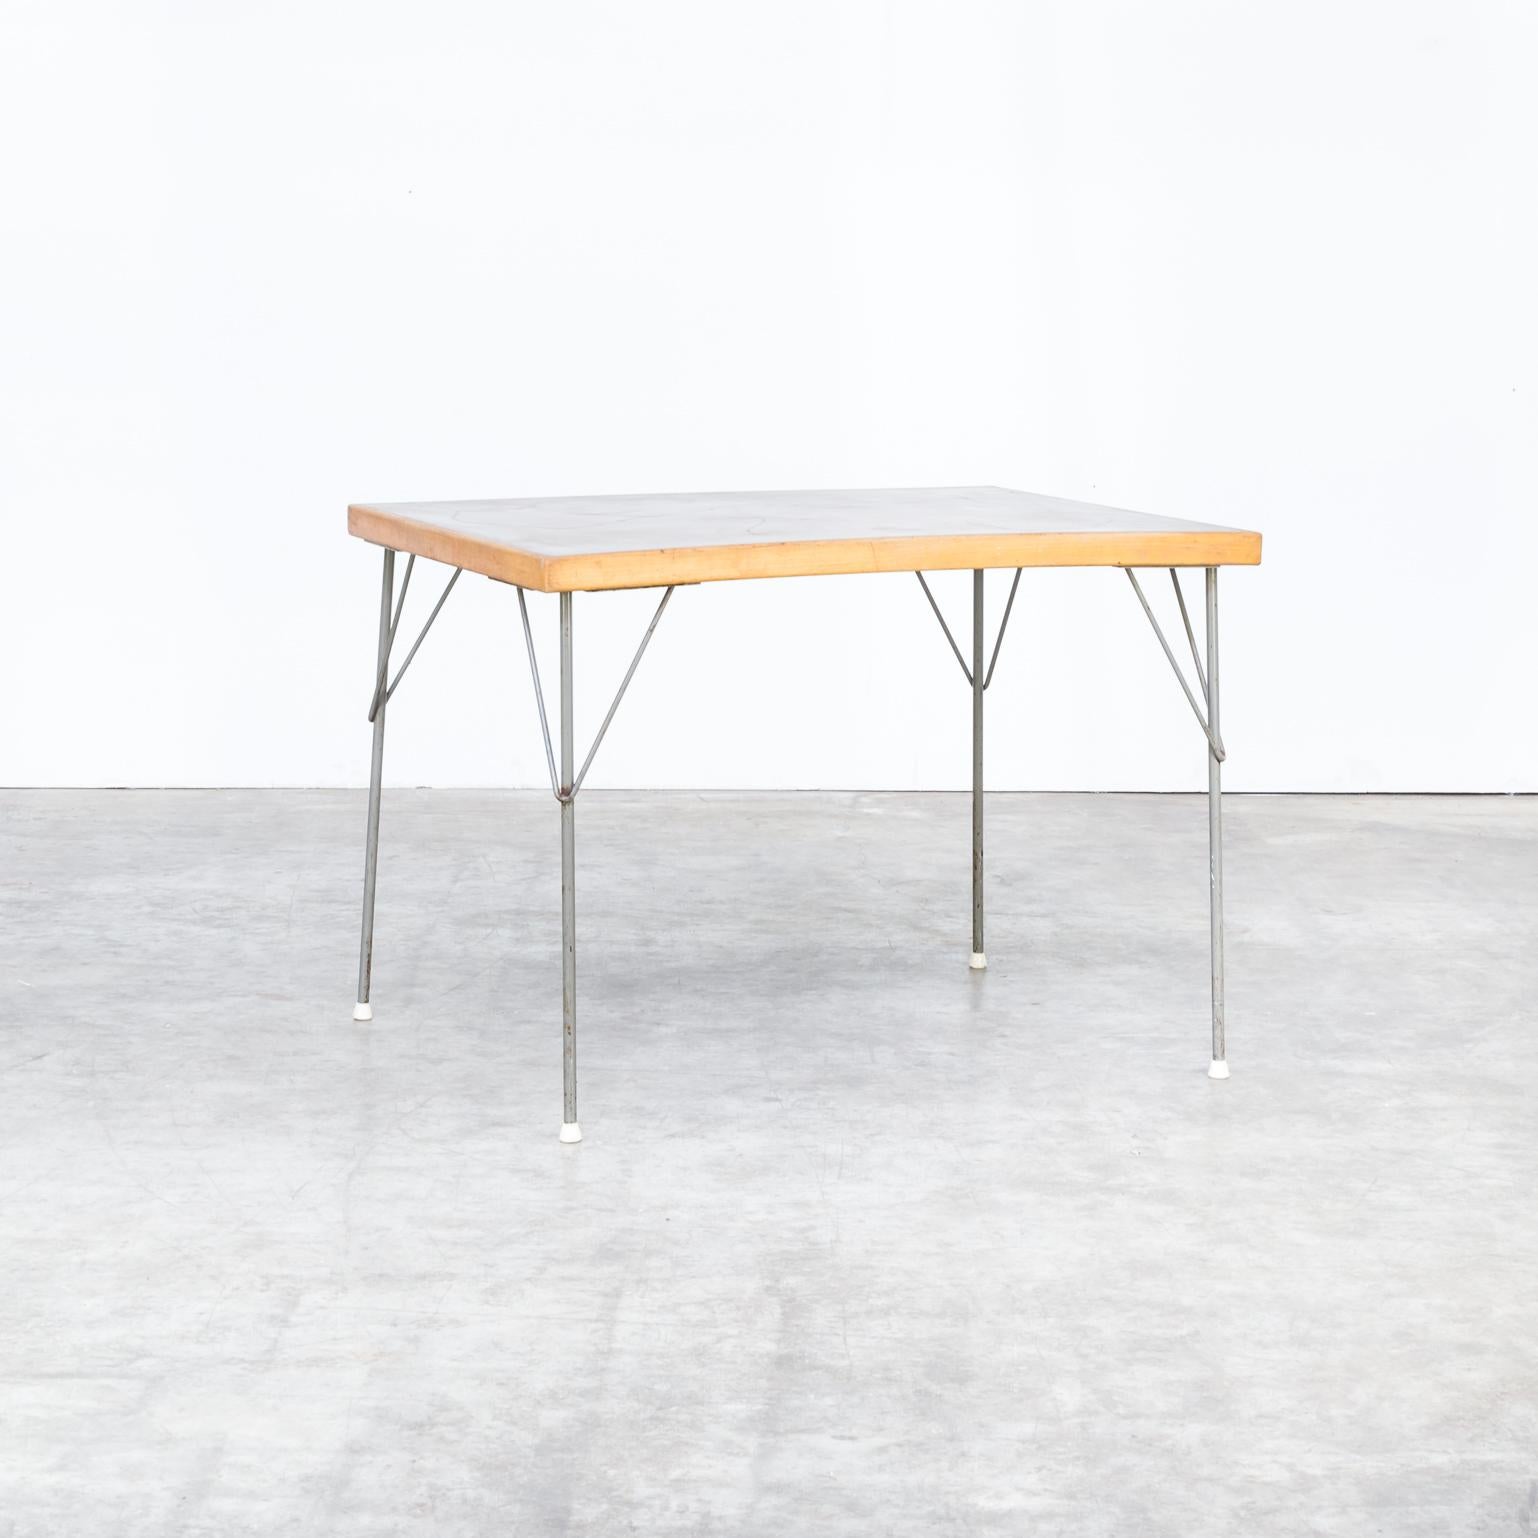 1950s Wim Rietveld model 530 dining table for Gispen. Good condition wear consistent with age and use.